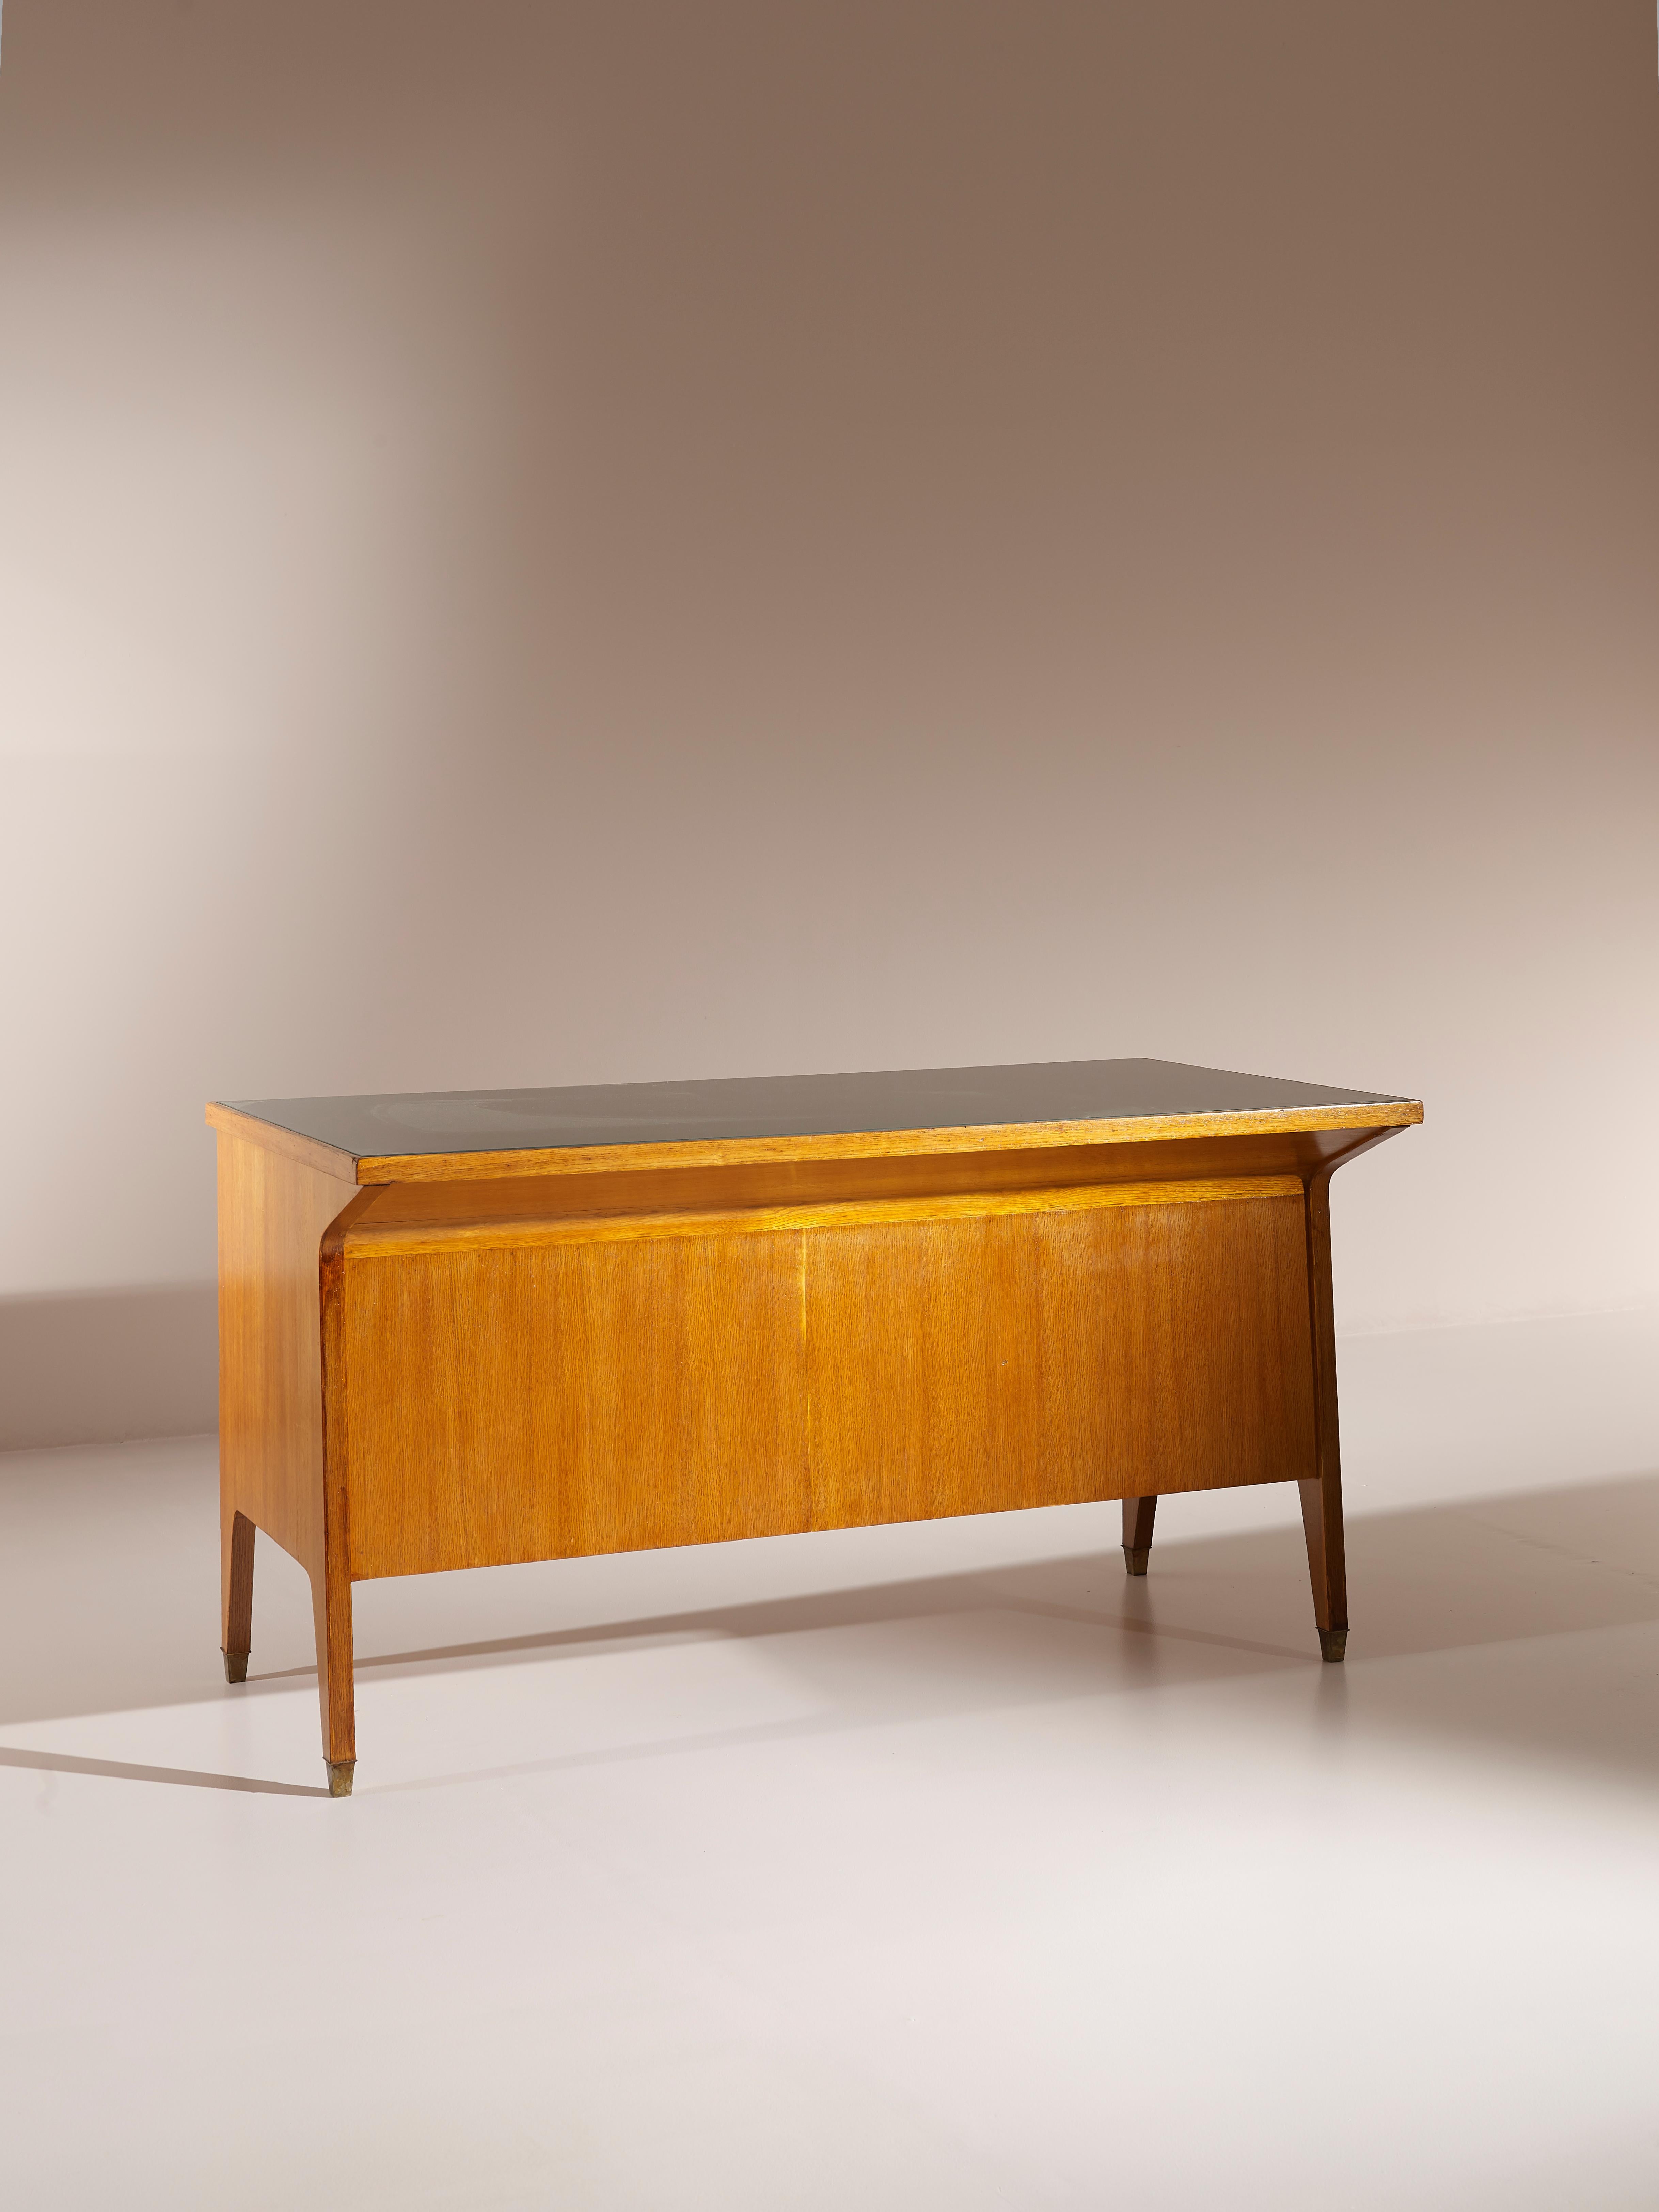 Mid-20th Century Italian Mid-Century Oak Desk Gio Ponti Inspired, with Brass Feet and Glass Top